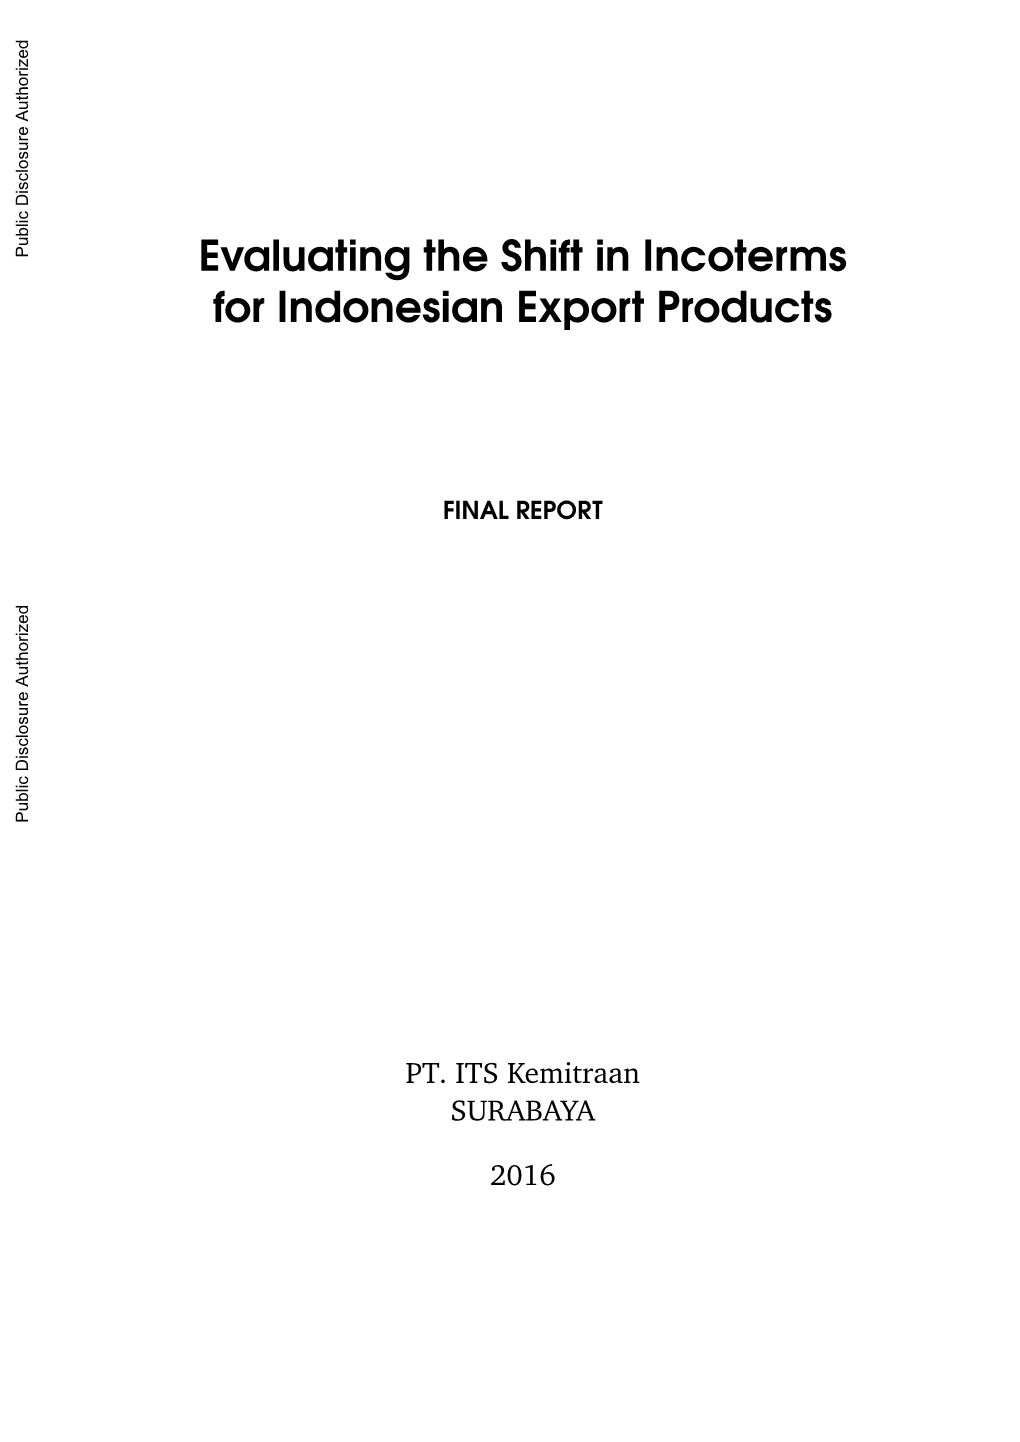 Evaluating the Shift in Incoterms for Indonesian Export Products